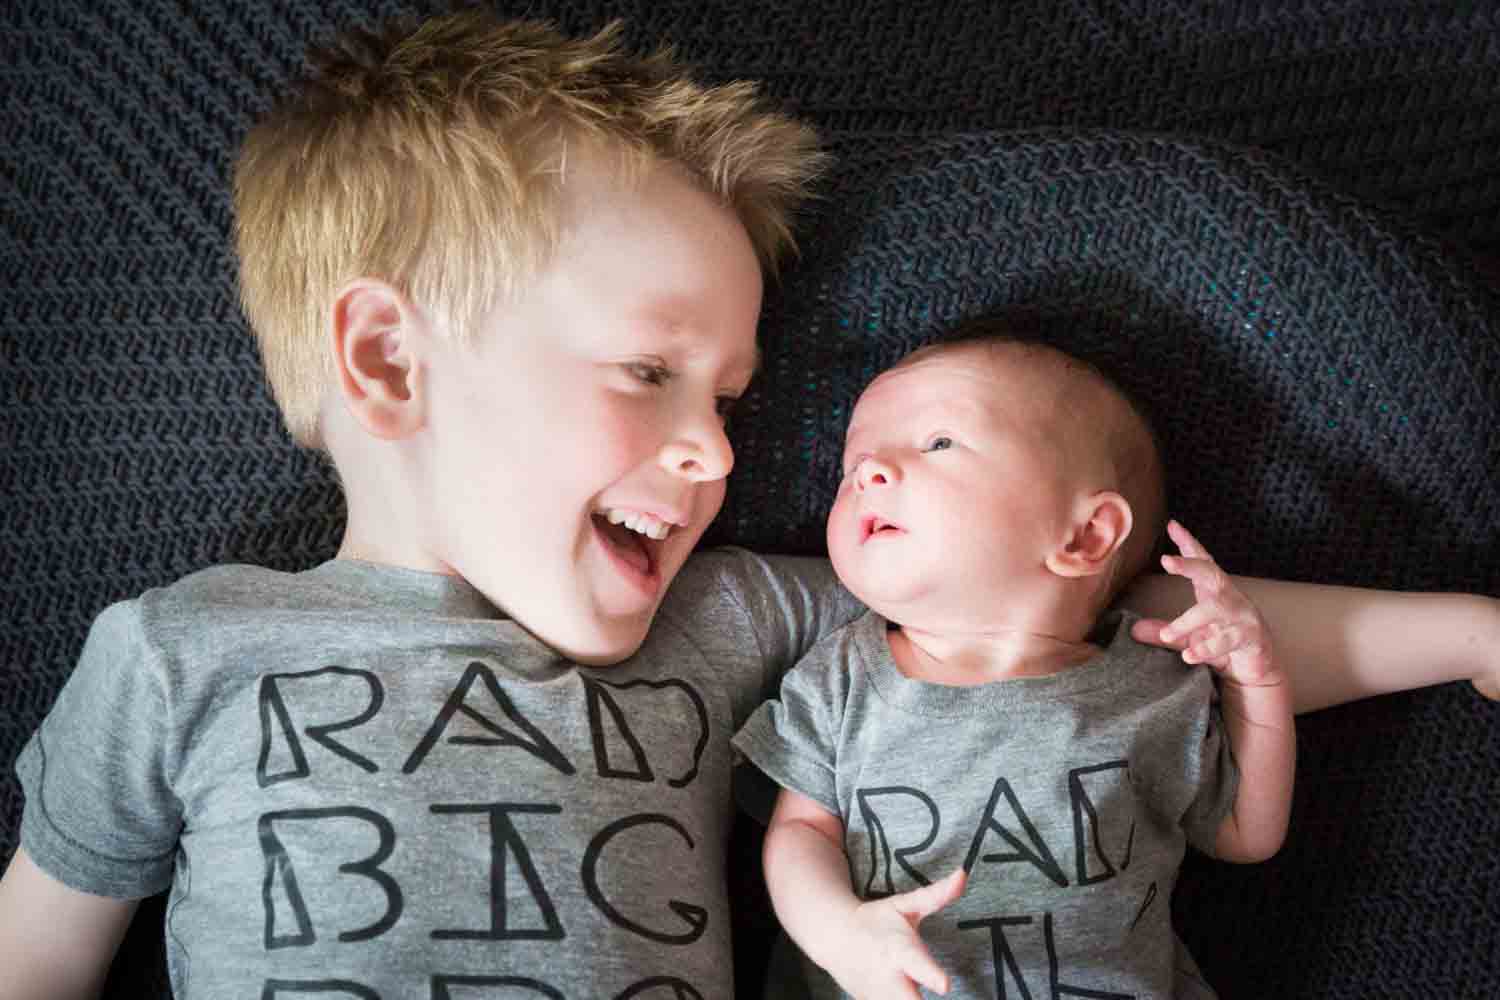 Little boy looking at newborn baby and wearing similar t-shirts